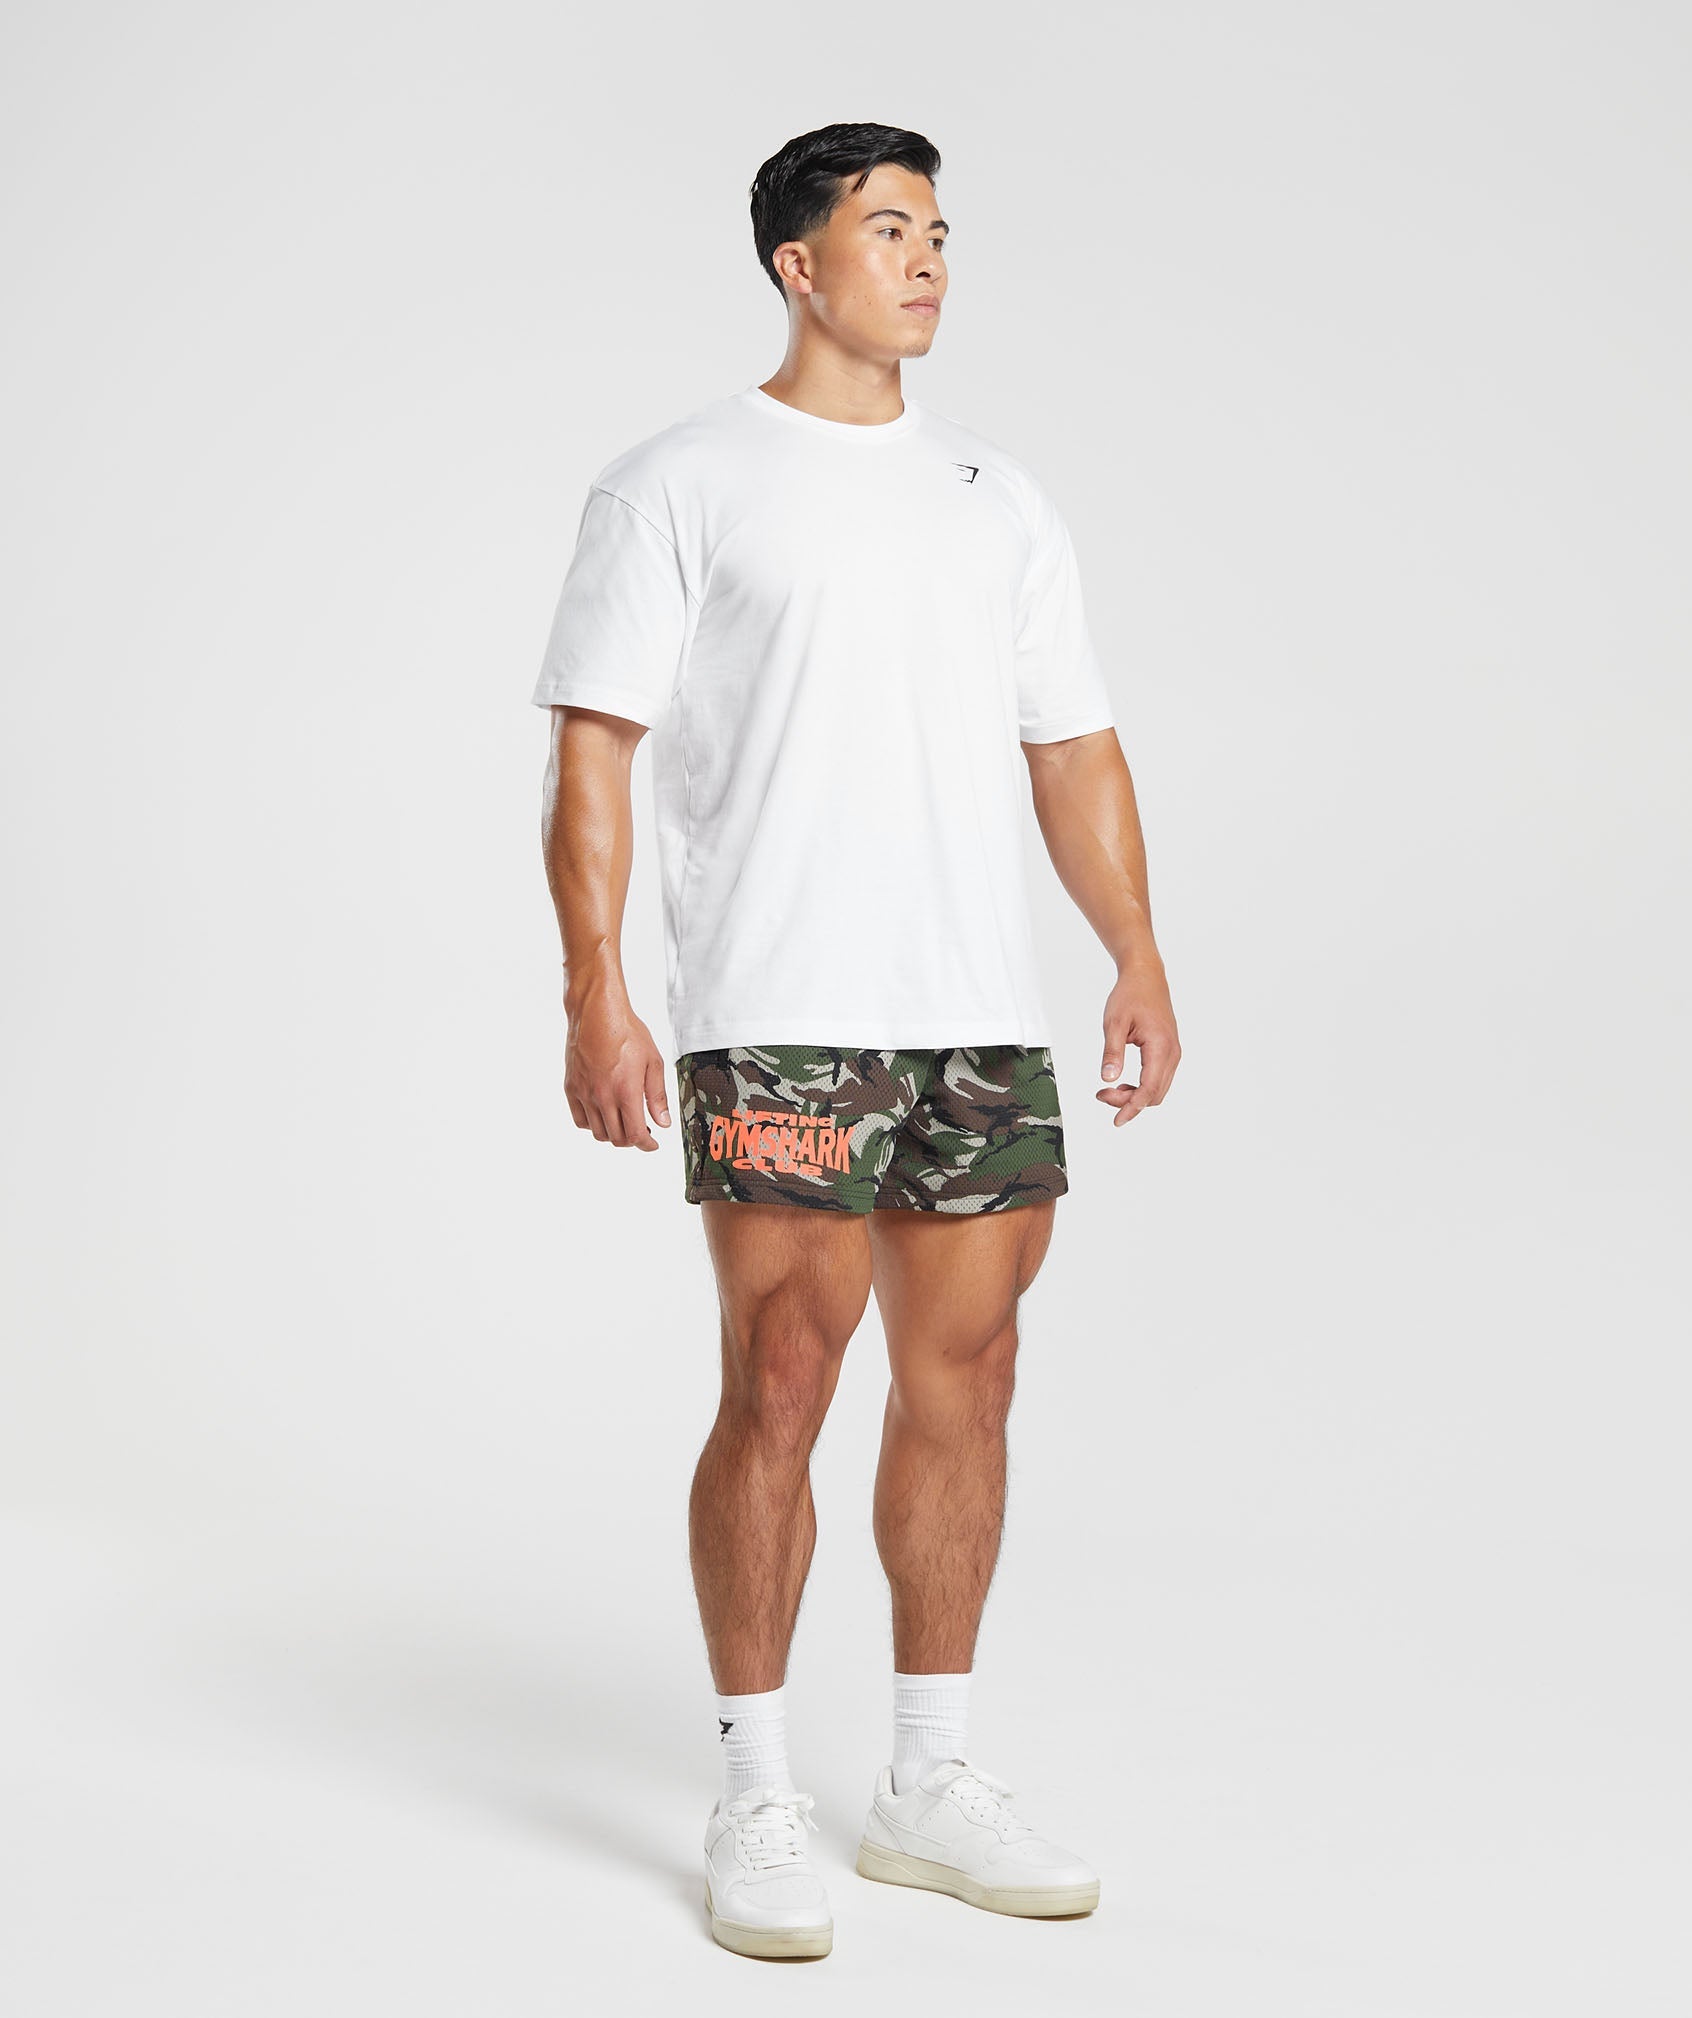 Lifting Club Printed Mesh 5" Shorts in Winter Olive - view 4